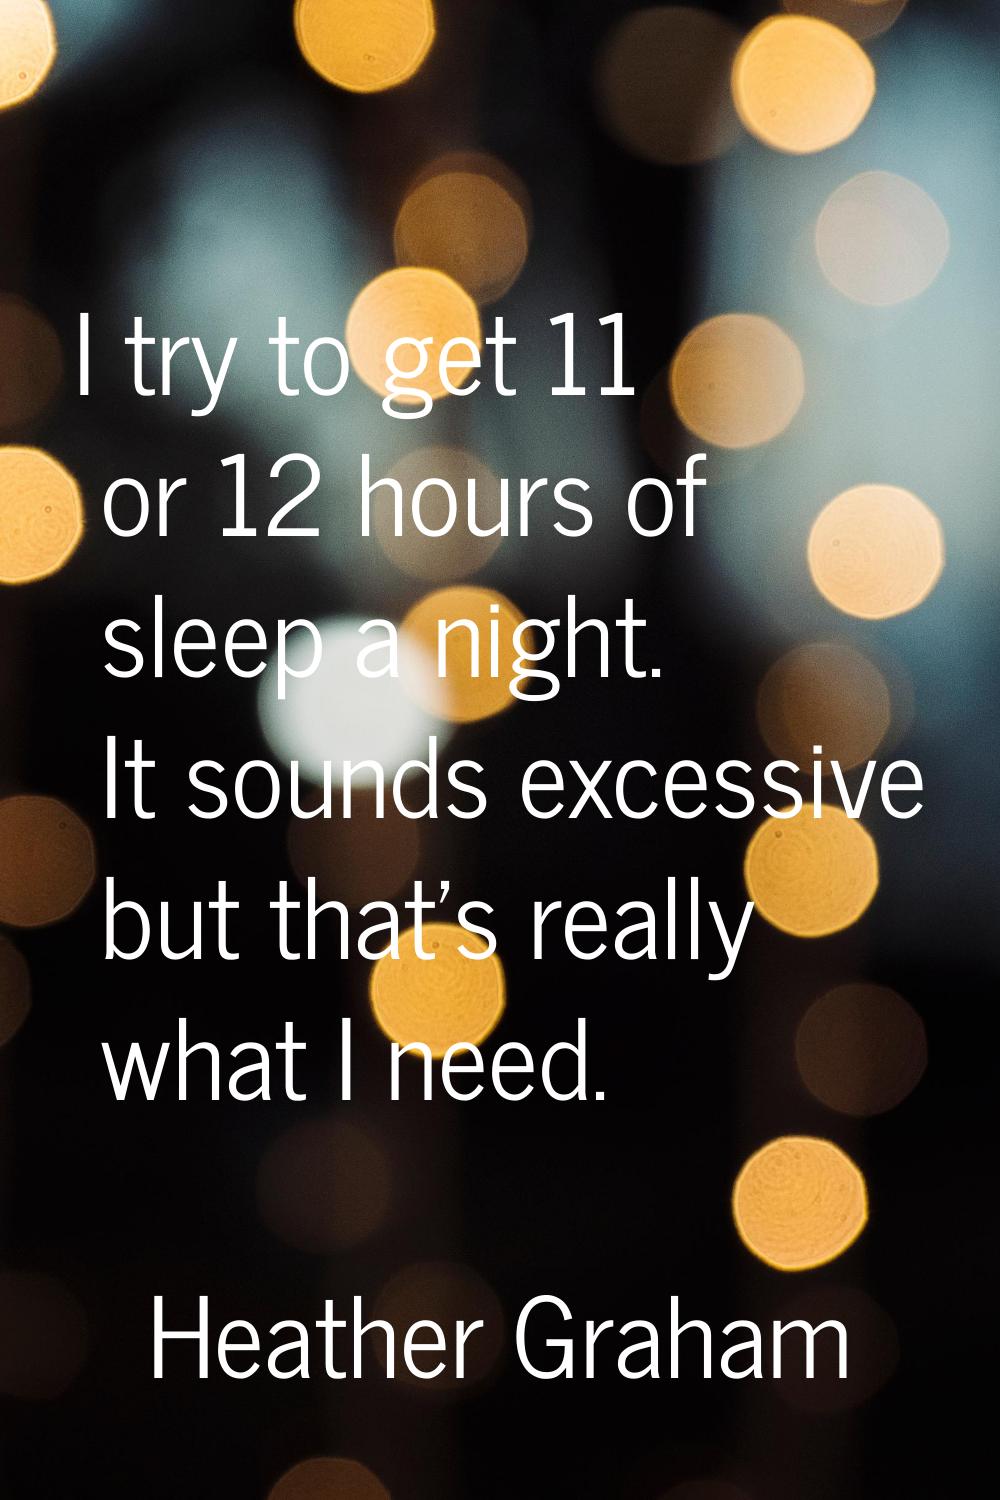 I try to get 11 or 12 hours of sleep a night. It sounds excessive but that's really what I need.